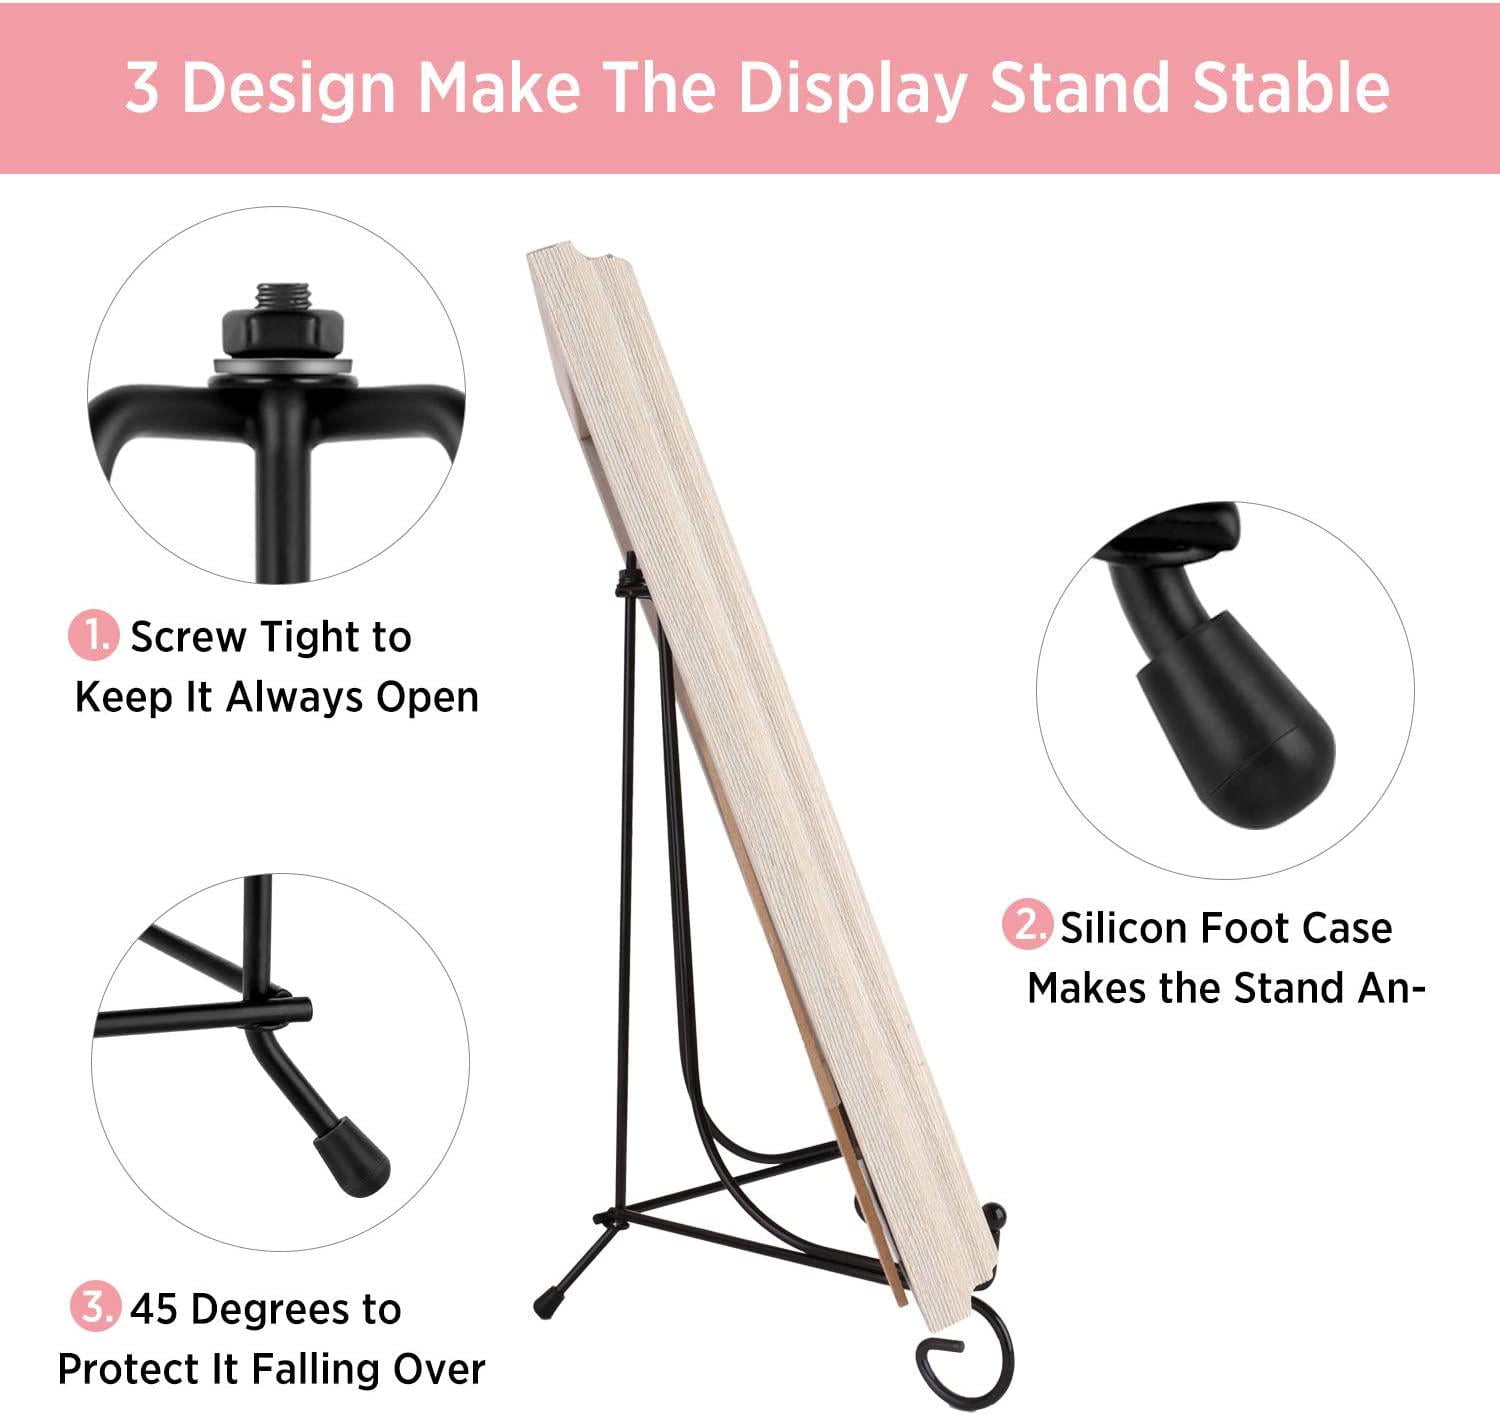 Teamkio 2 Pack Improved Anti-Slip 10 Inch Plate Holder Display Stand Book Display Stand Picture Frame Holder Stand Easel Display Stand